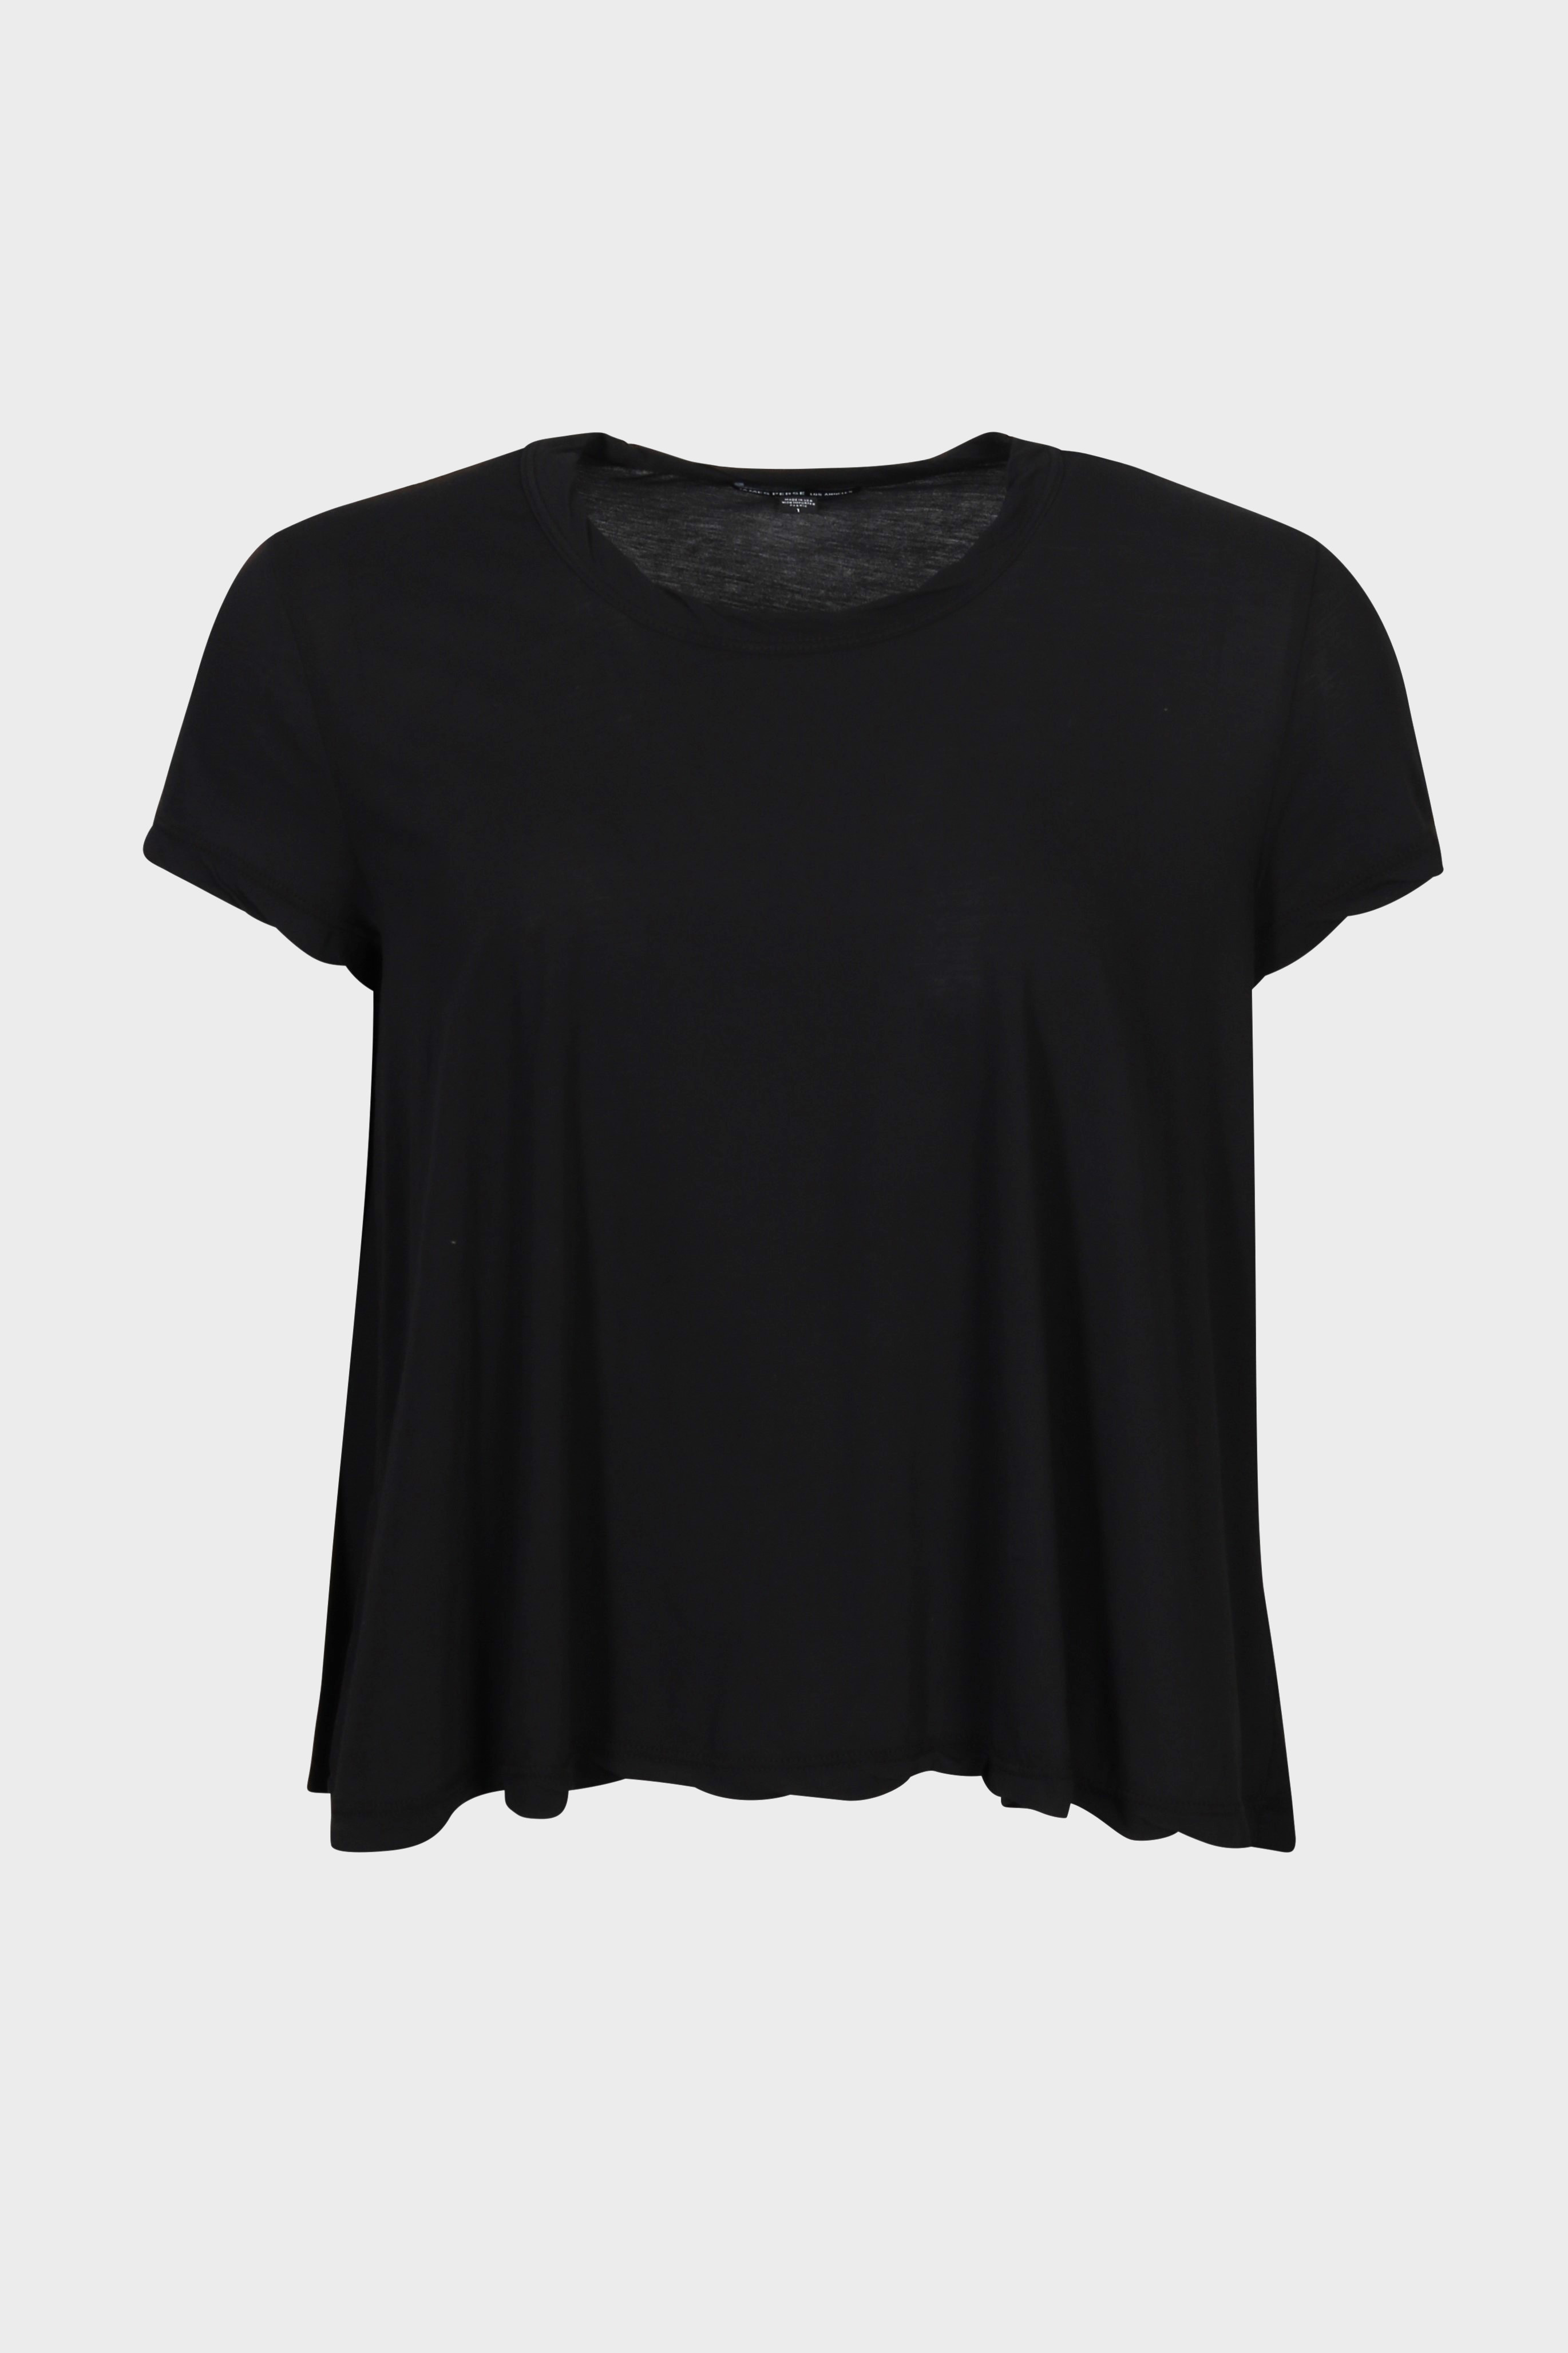 JAMES PERSE High Gauge A-Line T-Shirt in Black